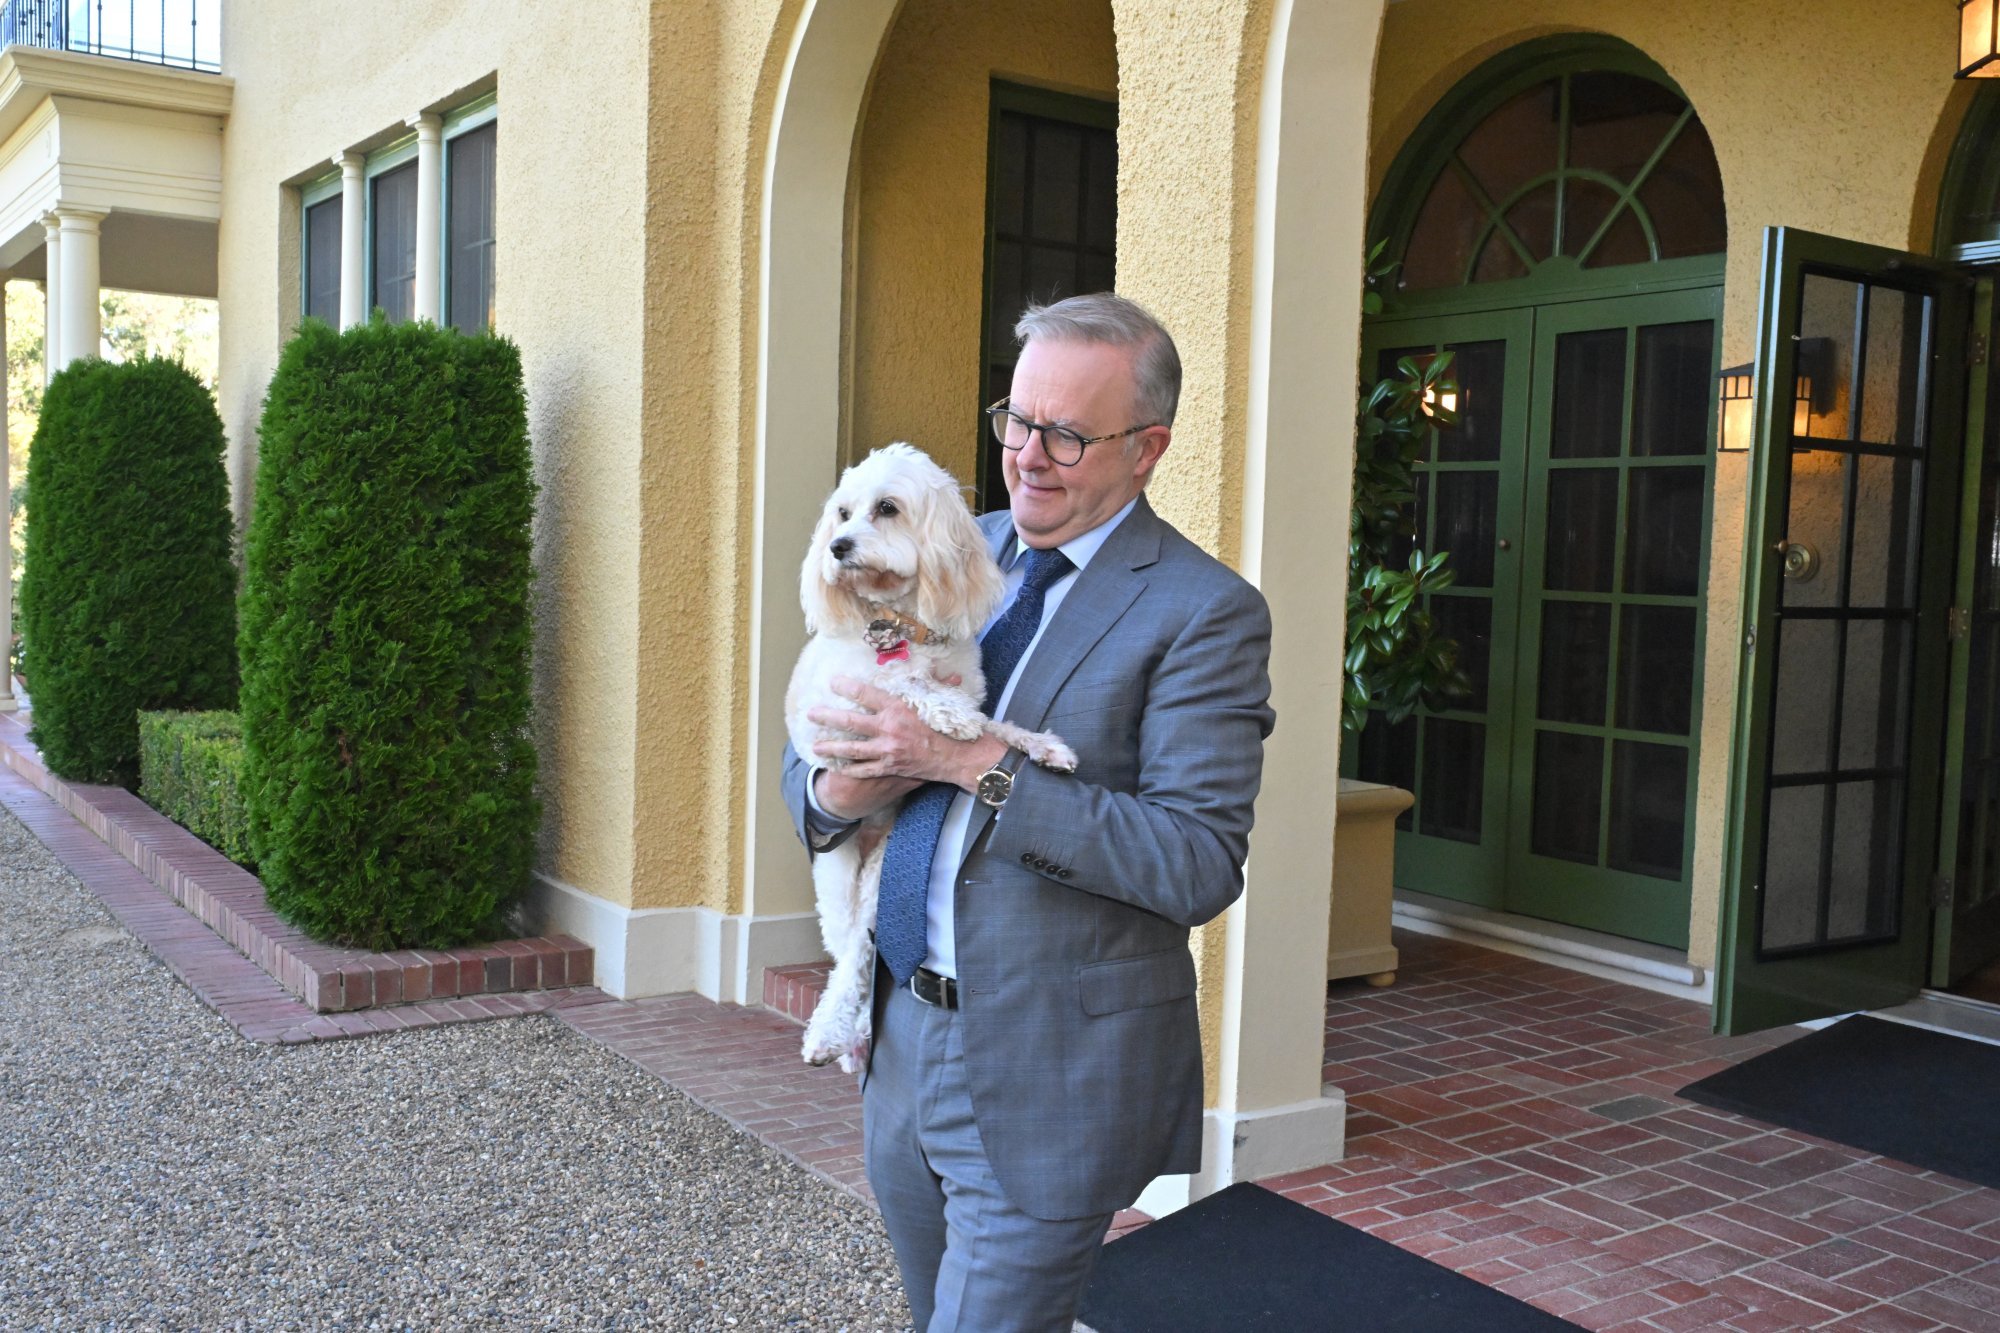 Australian Prime Minister Anthony Albanese (holding his dog, Toto) has helped improve his country’s ties with China since his election in 2022. Photo: EPA-EFE